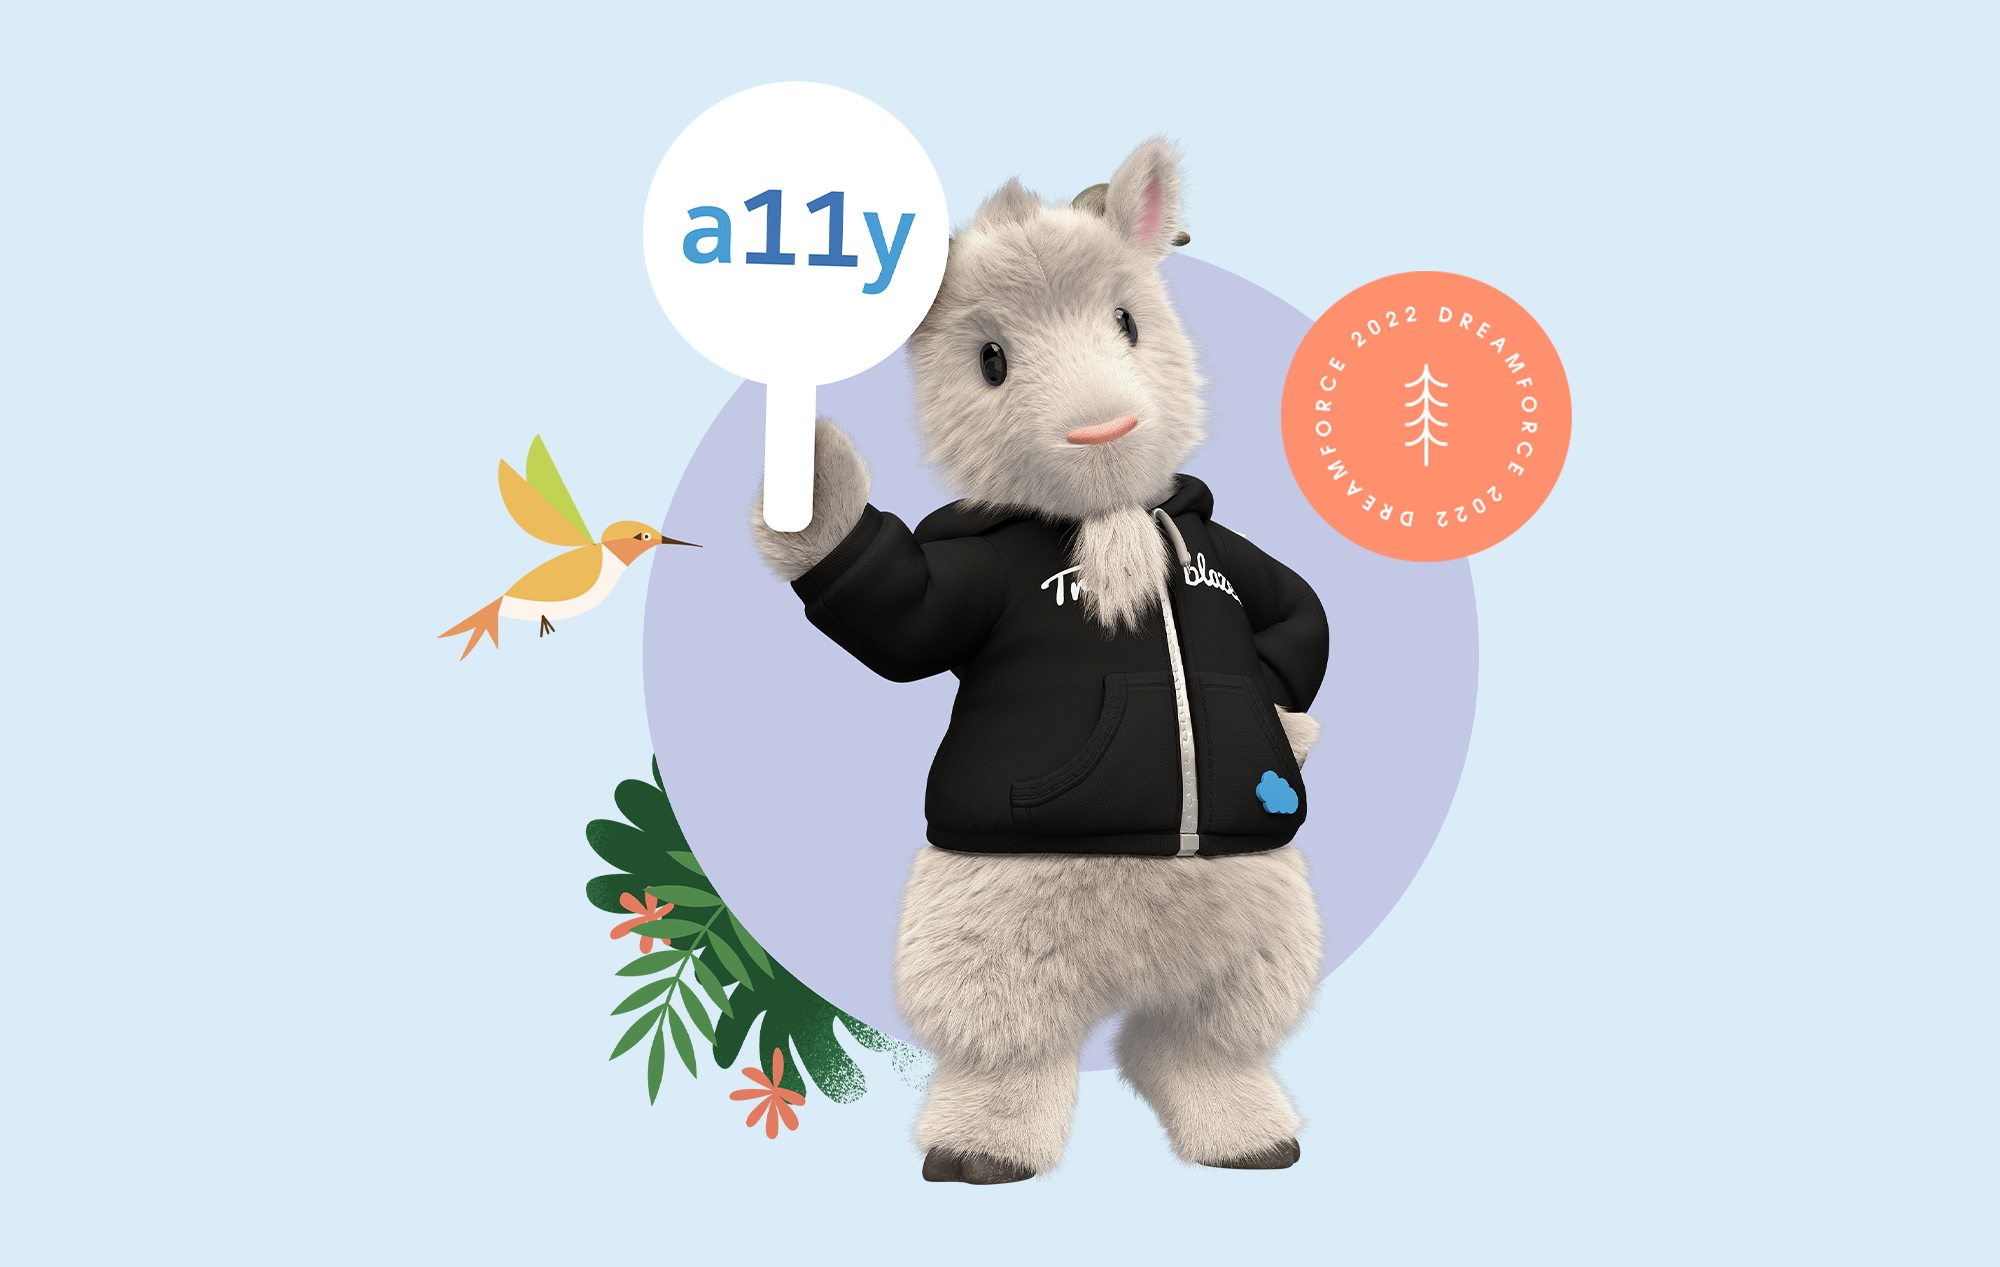 Cloudy the Goat wearing a Trailblazer sweatshirt, holding a lollipop-shaped paddle that says a11y. A badge on the top right says Dreamforce 2022.